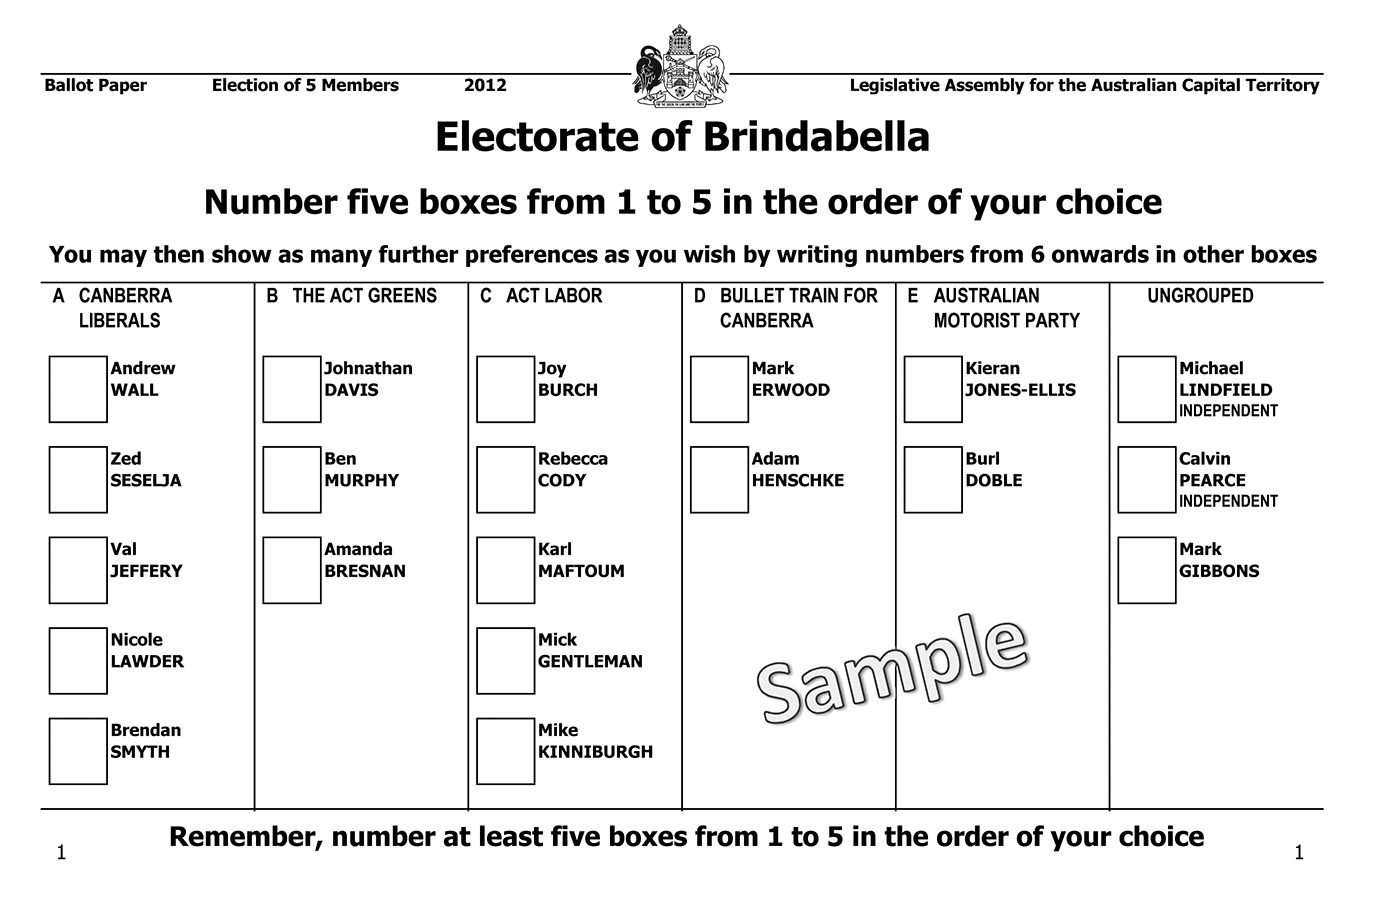 Sample ballot paper from the 2012 ACT Legislative Assembly election, for the electorate of Brindabella.